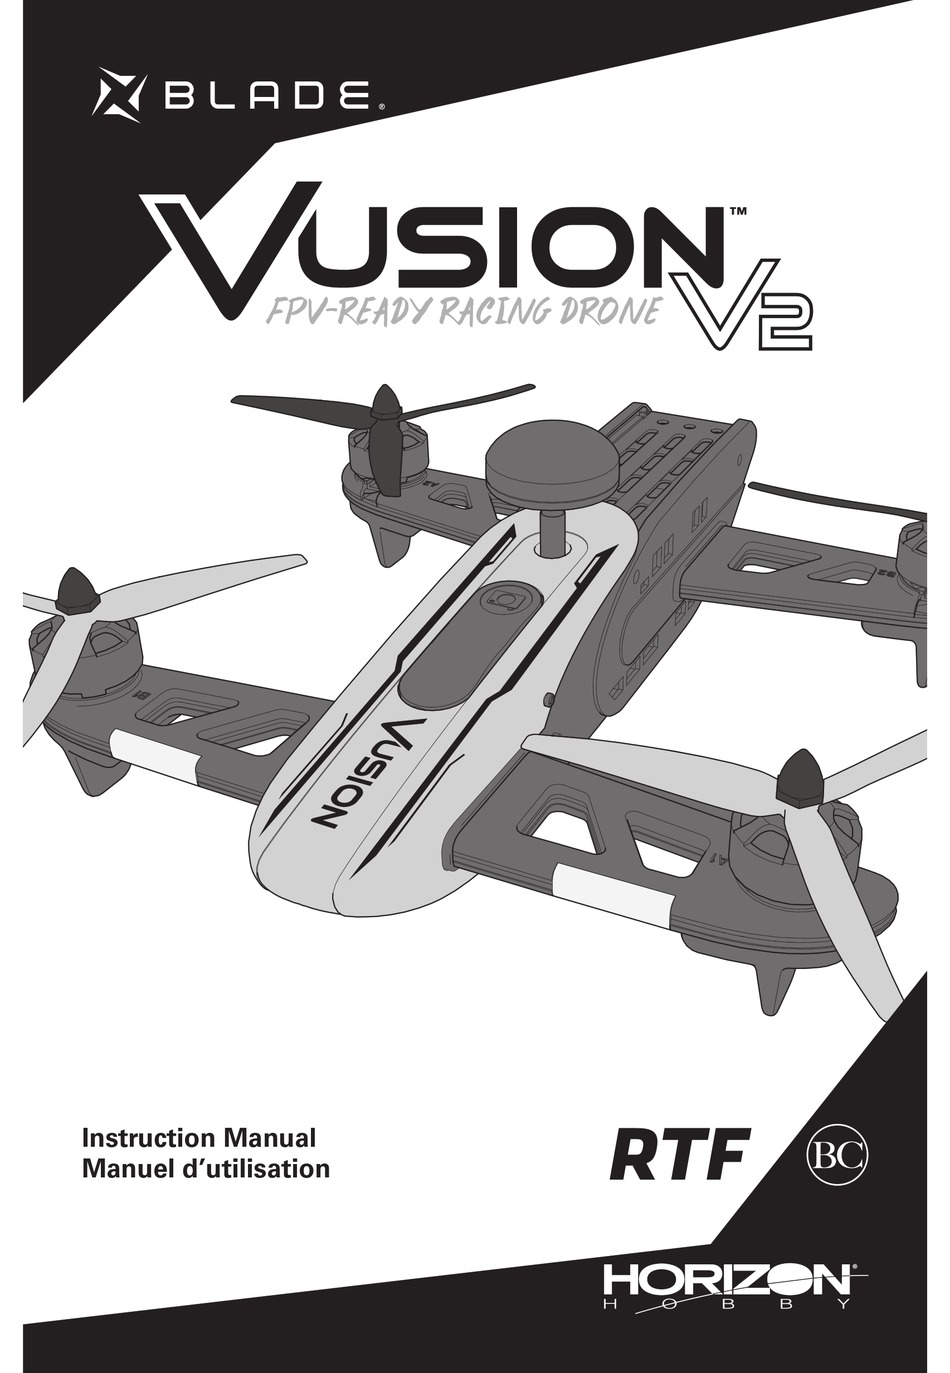 Blade Canopy Vusion V2 Race Drone BLH02401